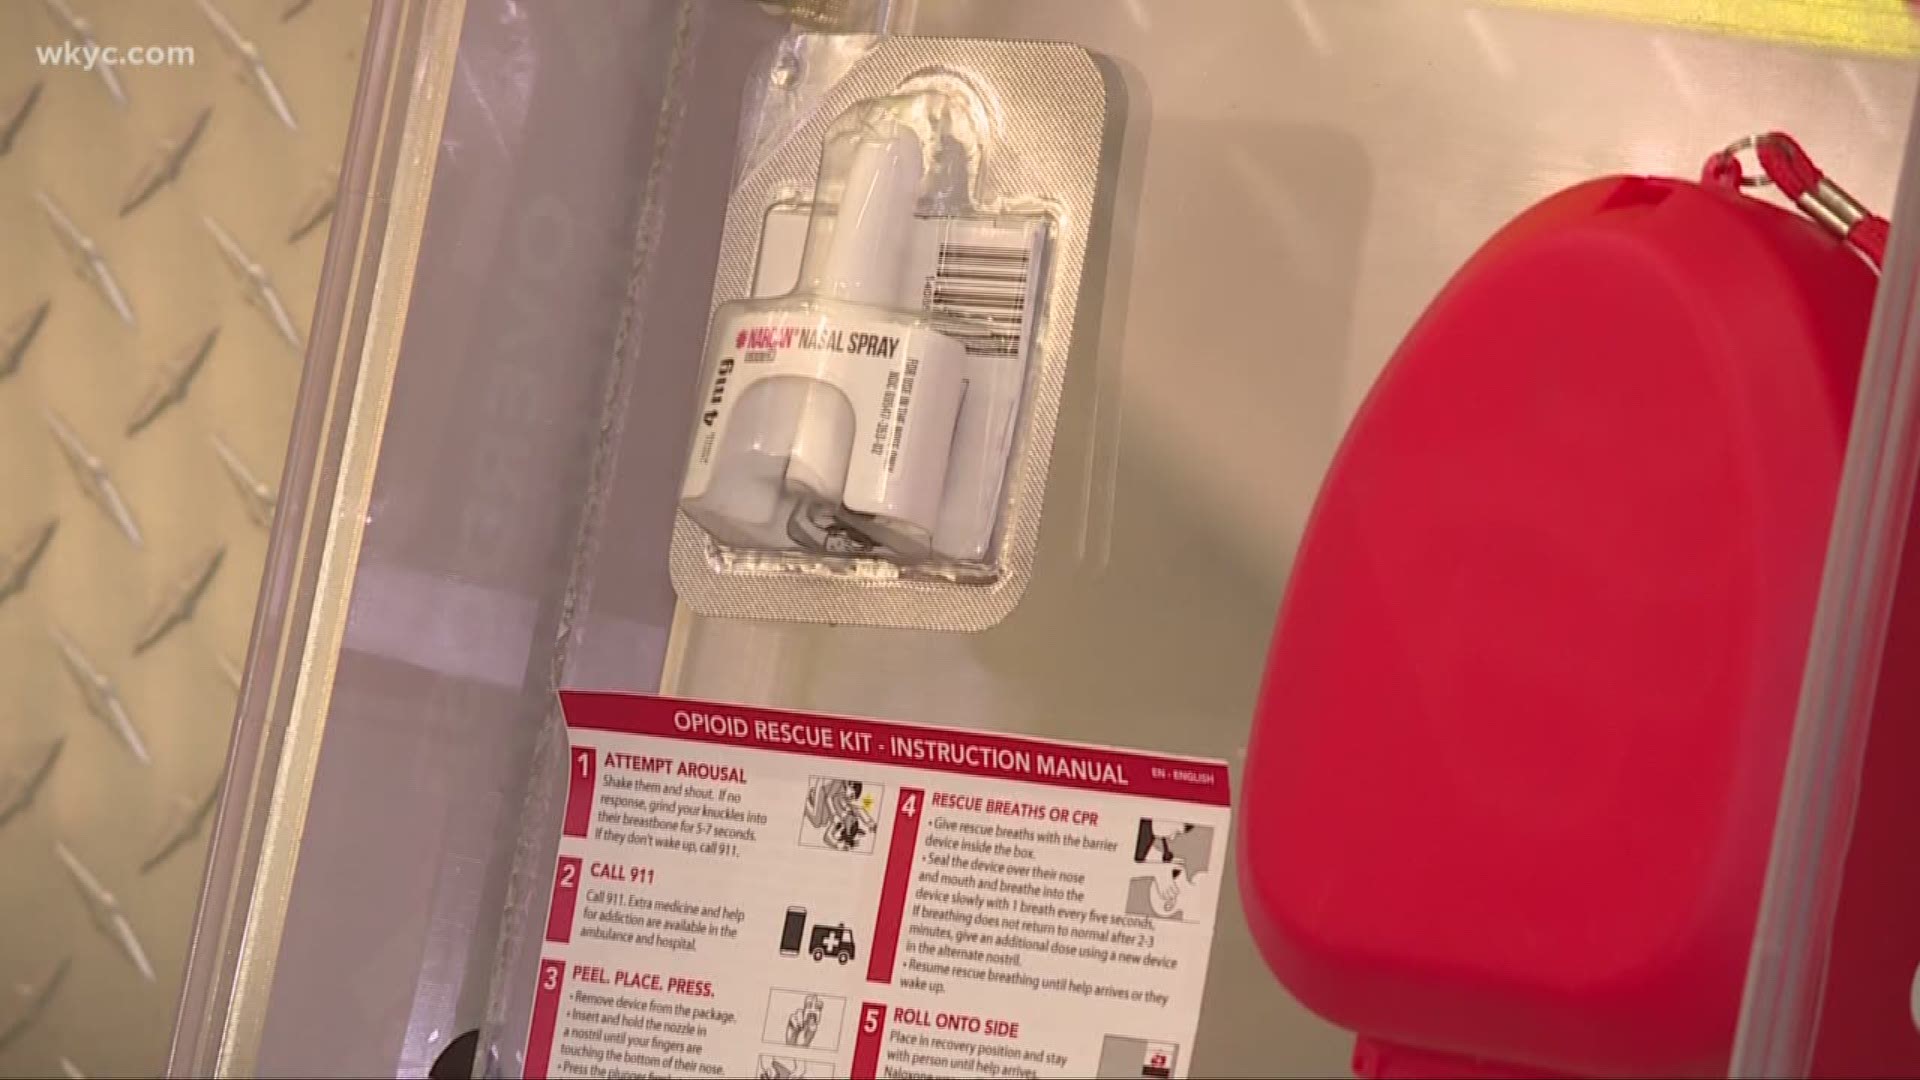 City of Green to equip hotels with Narcan kits